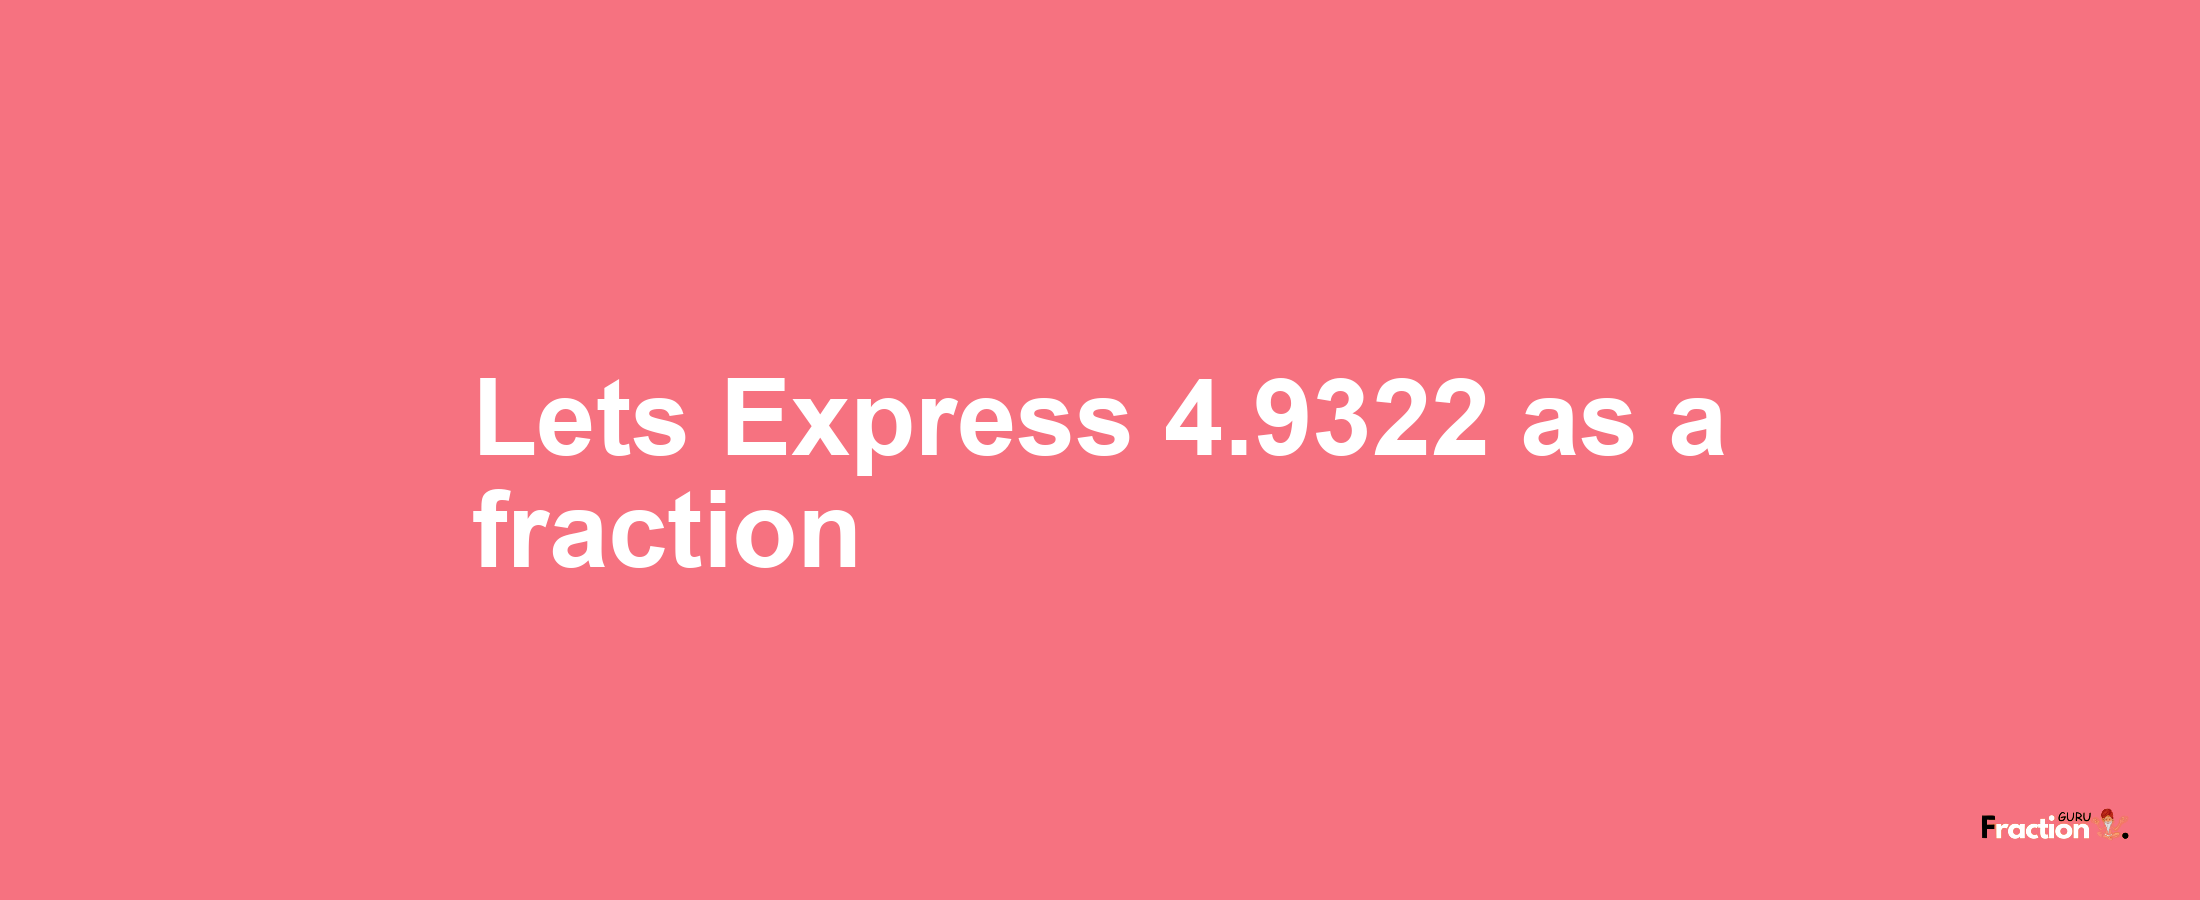 Lets Express 4.9322 as afraction